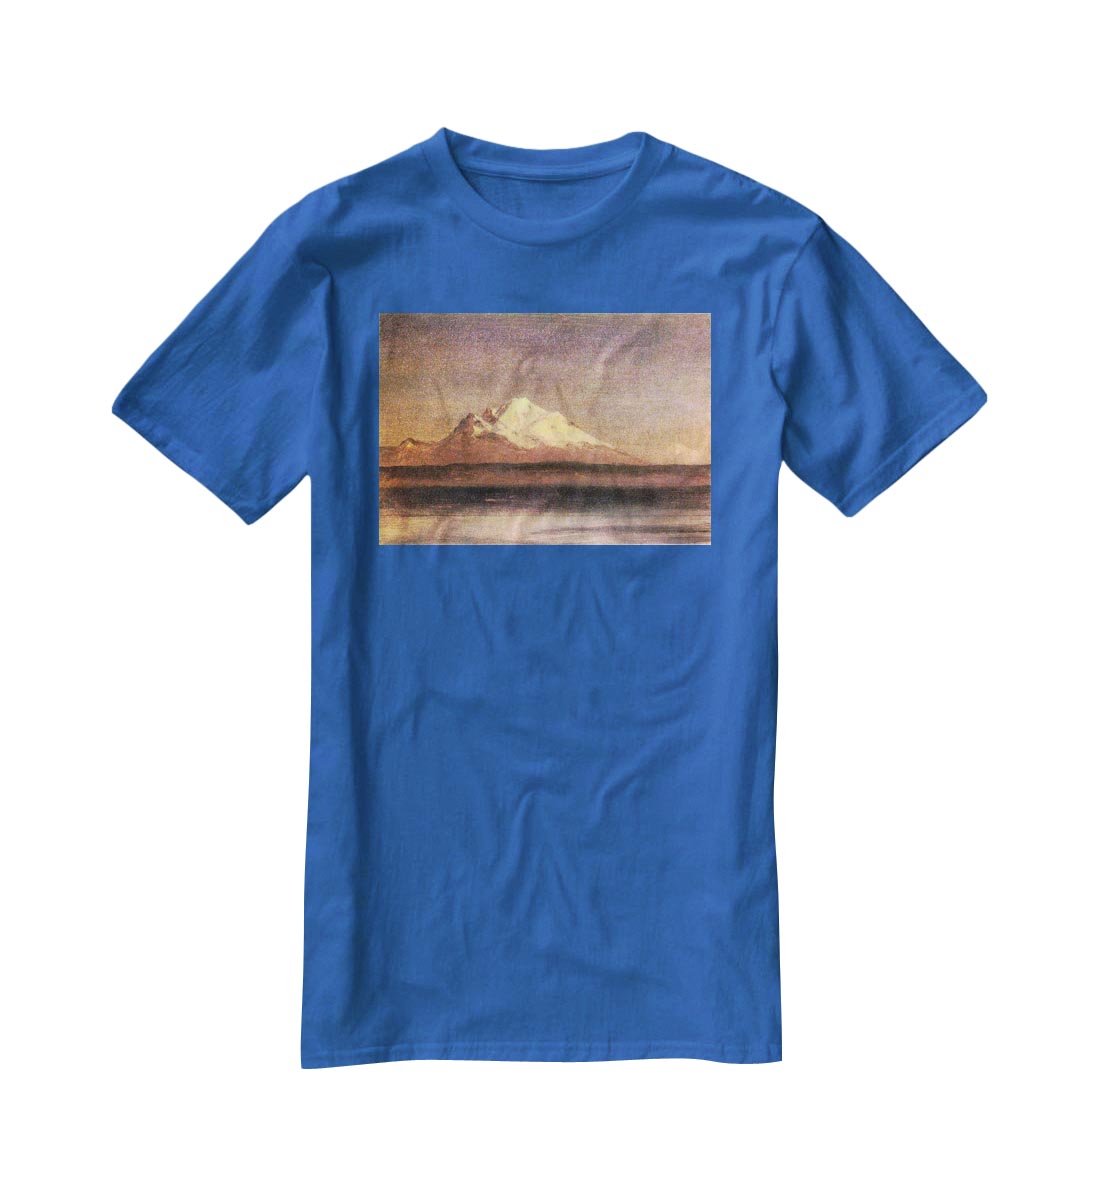 Snowy Mountains in the Pacific Northwest 2 by Bierstadt T-Shirt - Canvas Art Rocks - 2